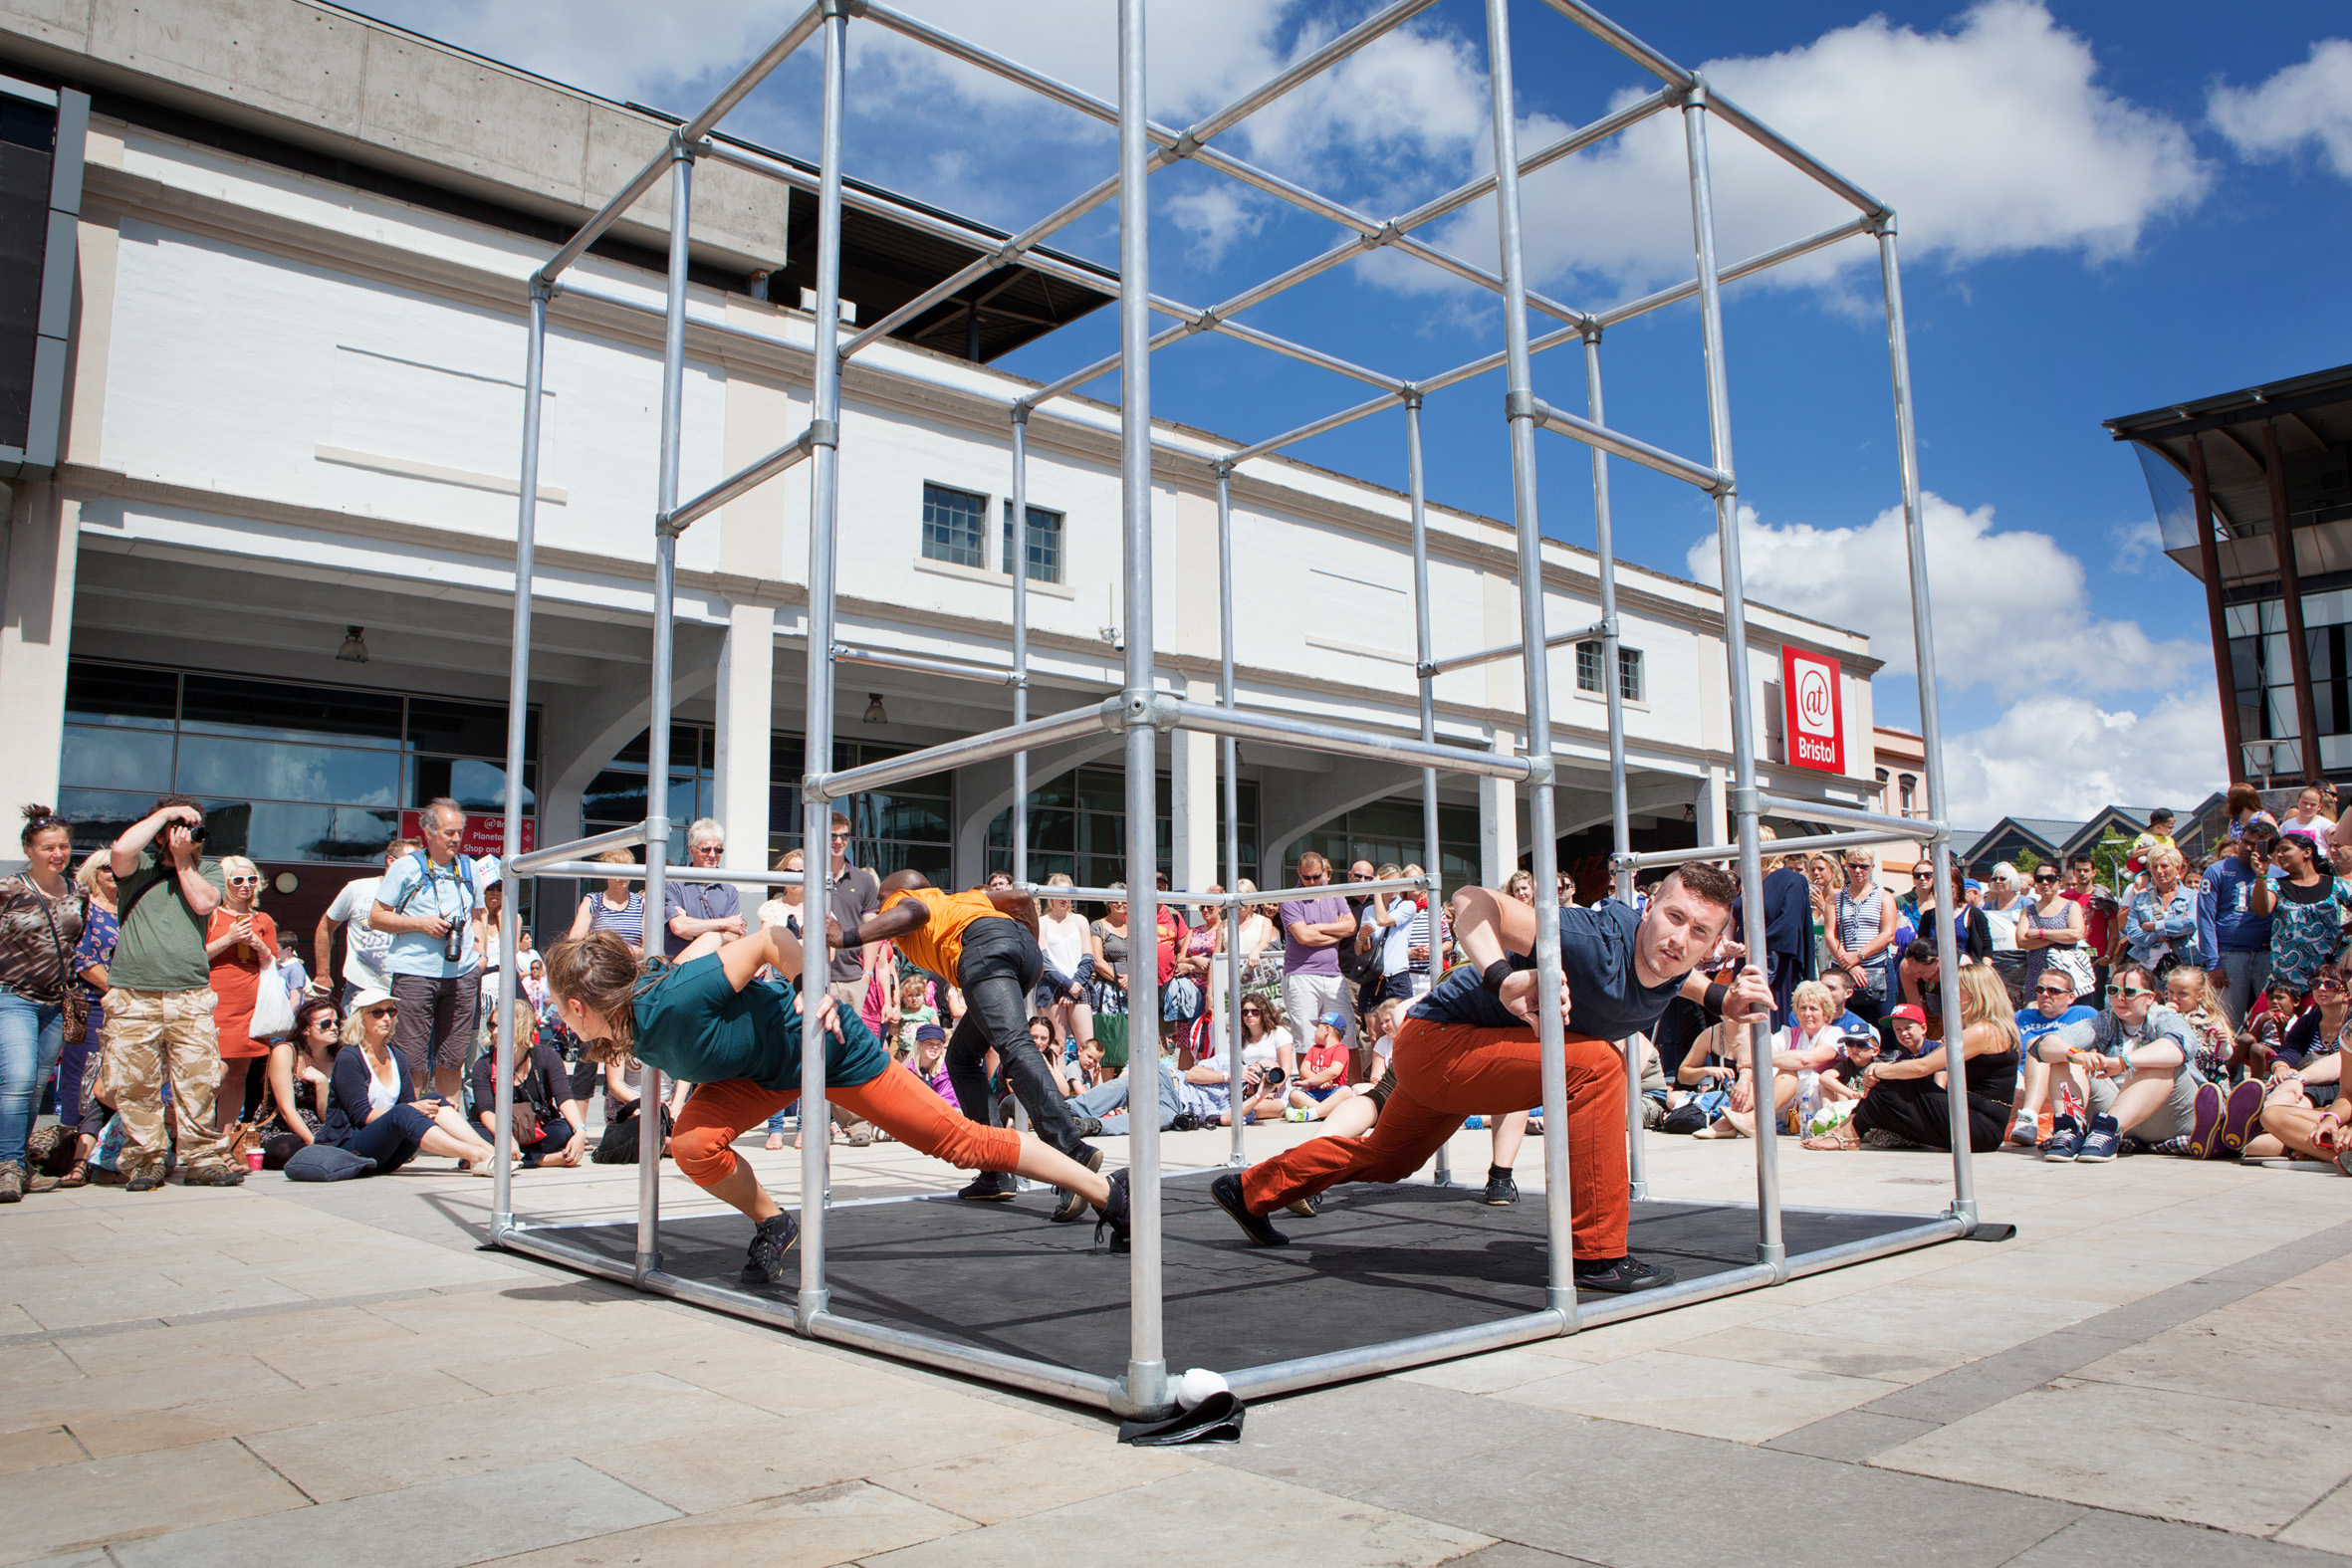 Motionhouse perform captive in a large cube cage outside @Bristol to a surrounding crowd